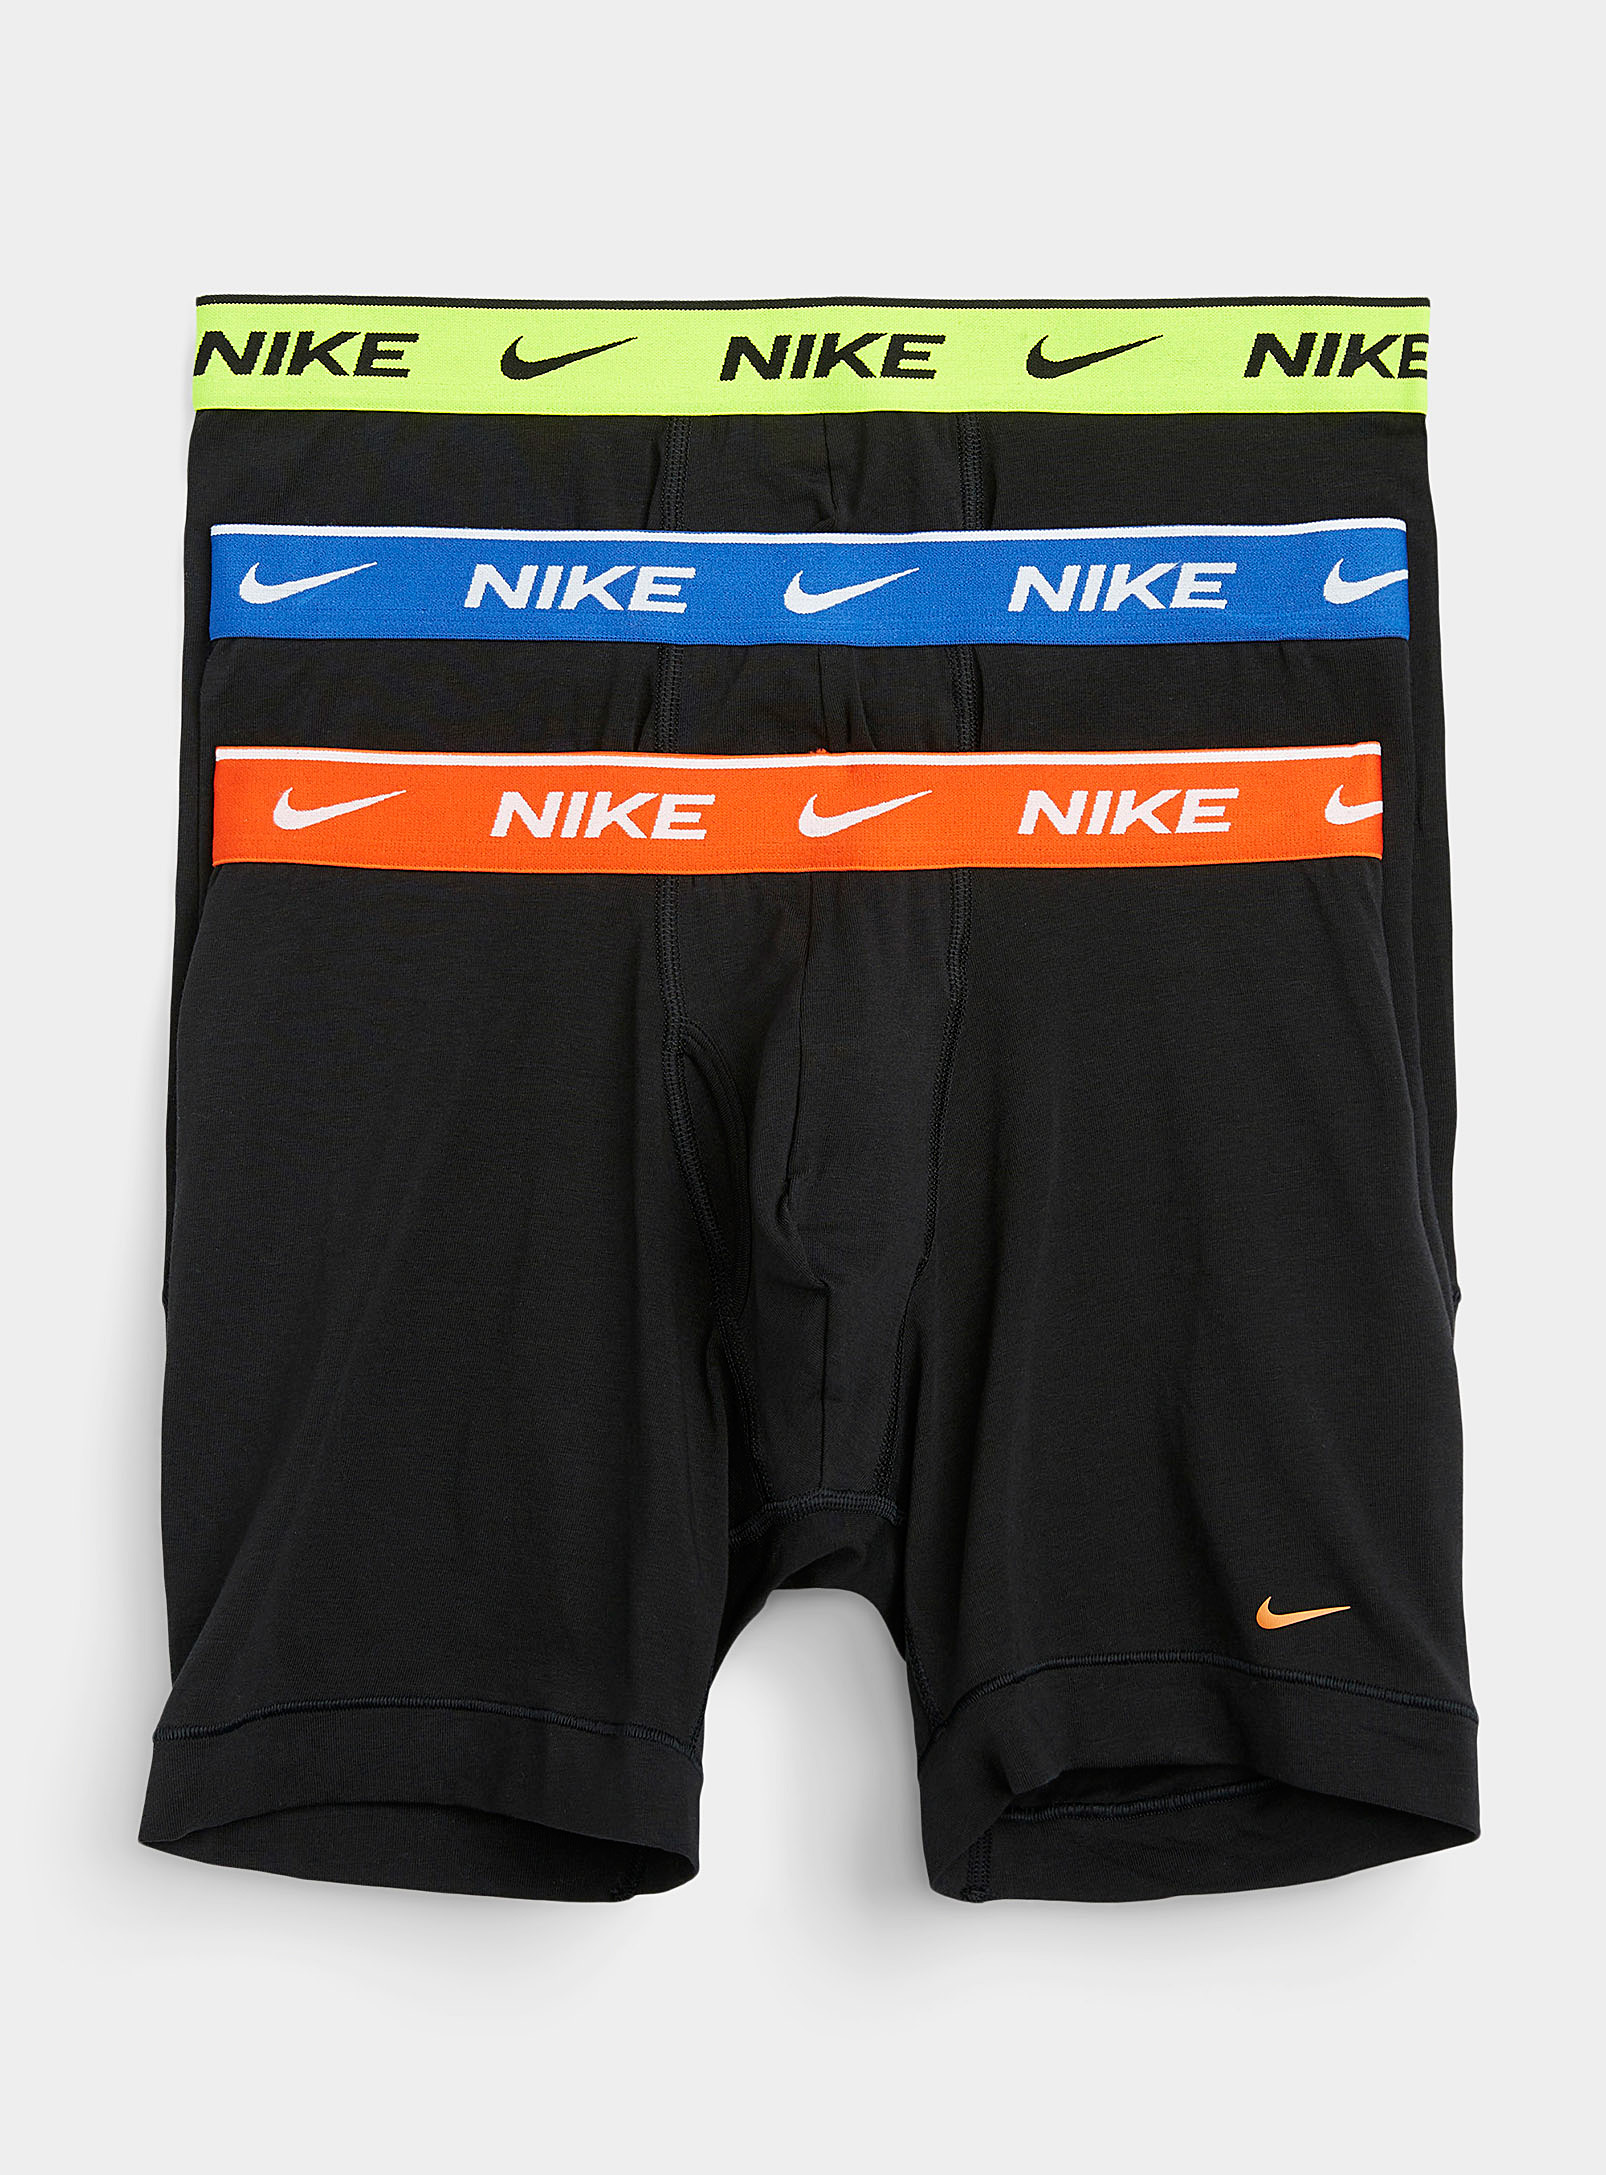 Nike Dri-fit Everyday Pop Band Boxer Briefs 3-pack In Assorted